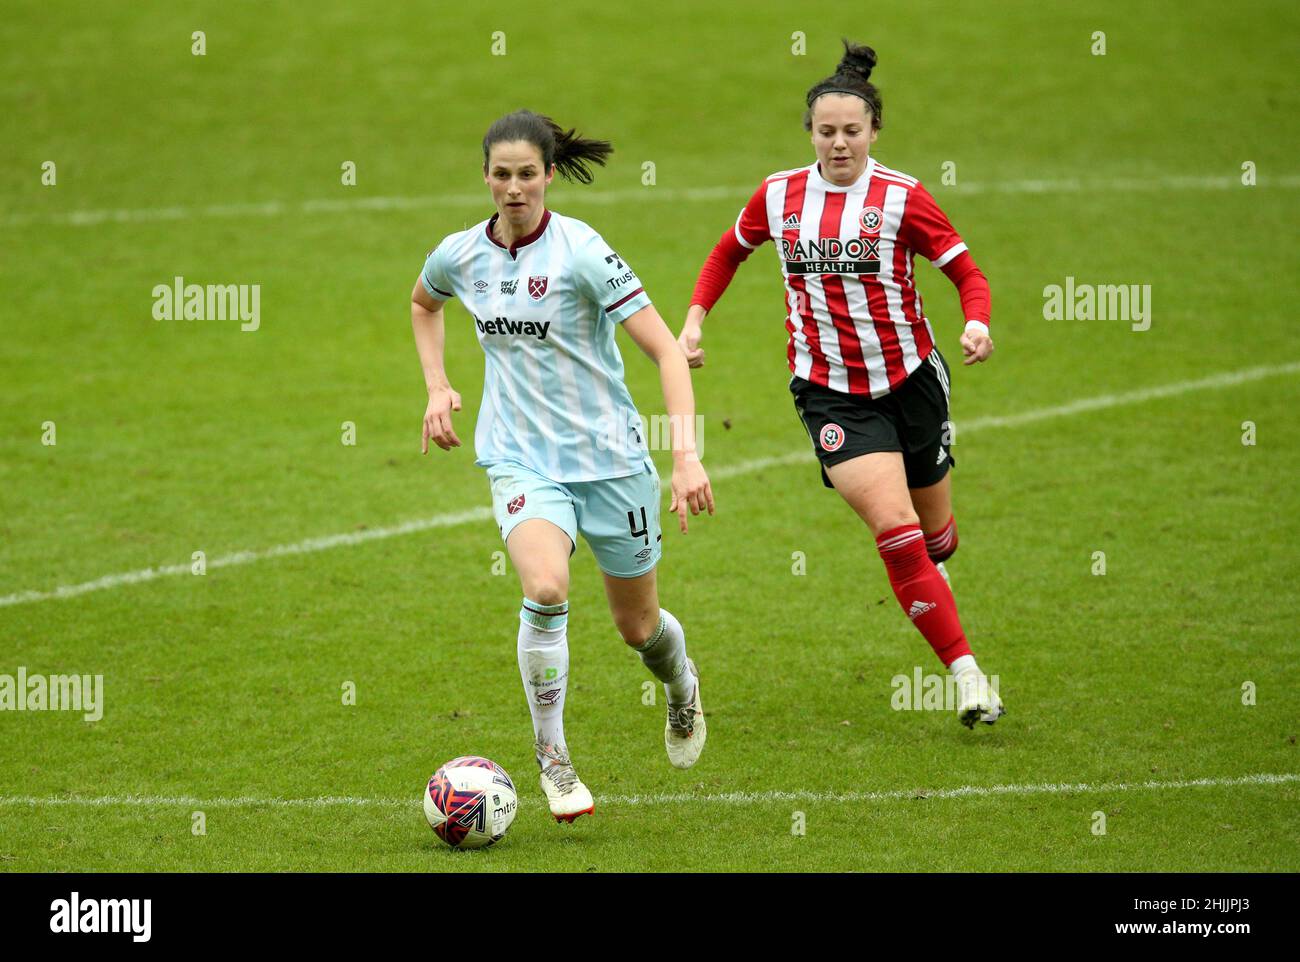 West Ham United’s Abbey-Leigh Stringer in action with Sheffield United ...